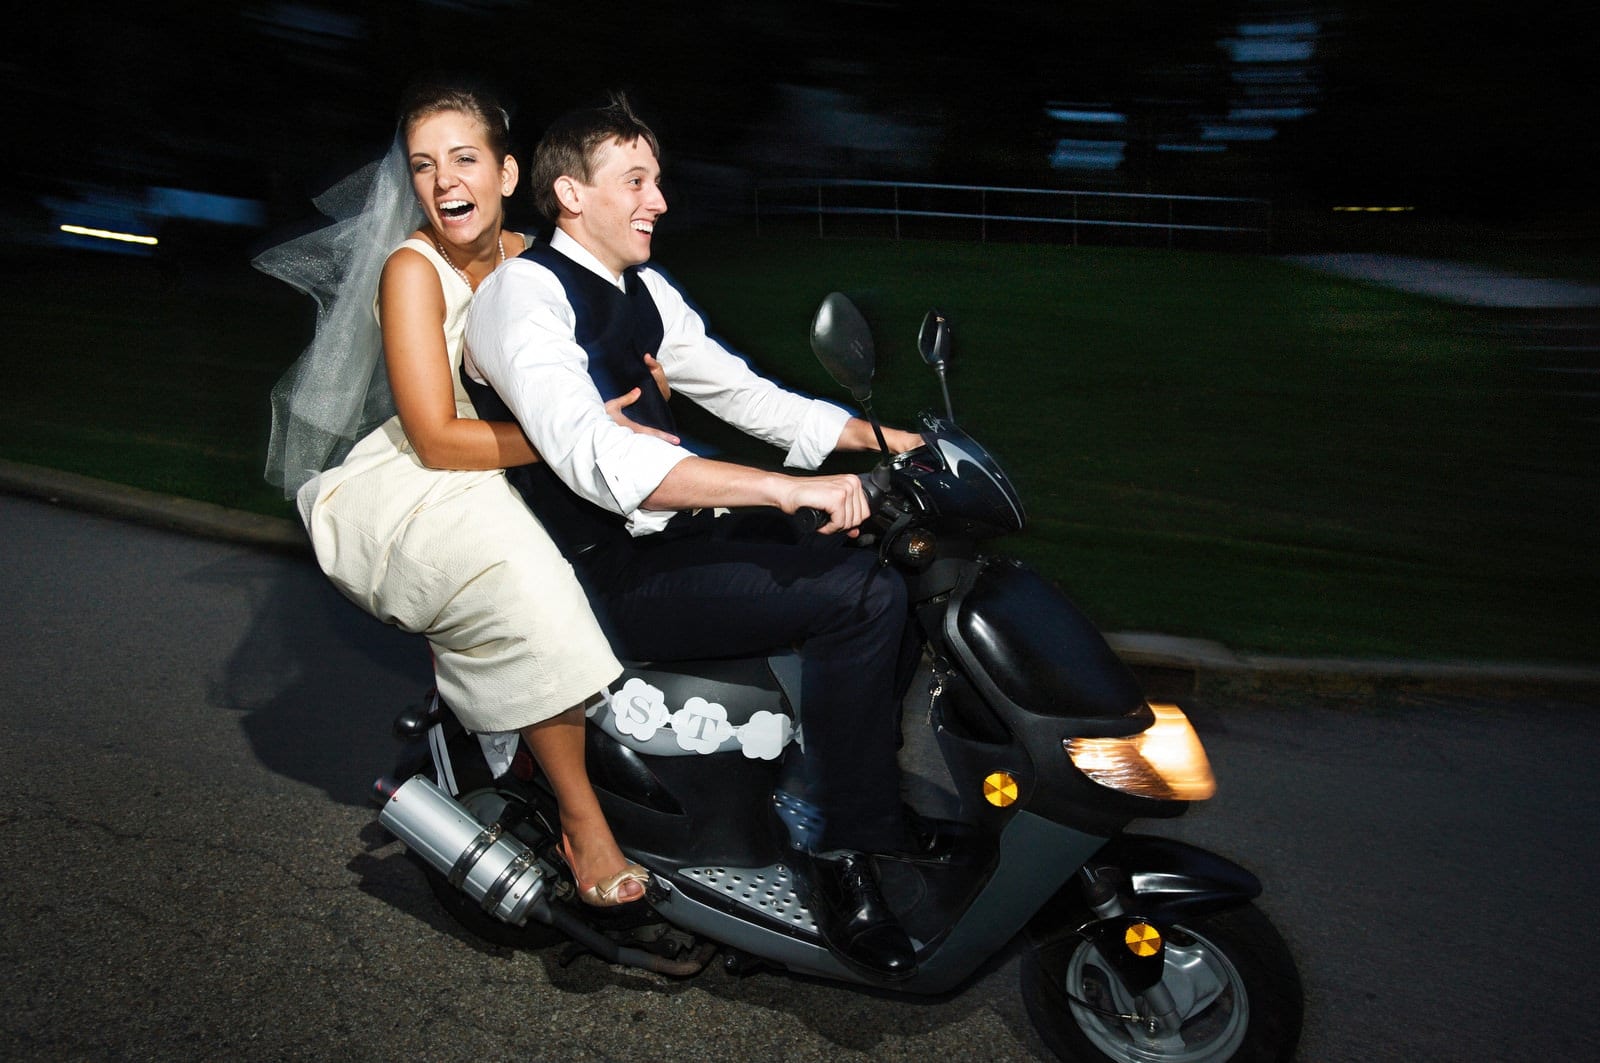 A bride laughs as she rides on the back of a motor scooter that her groom is driving.